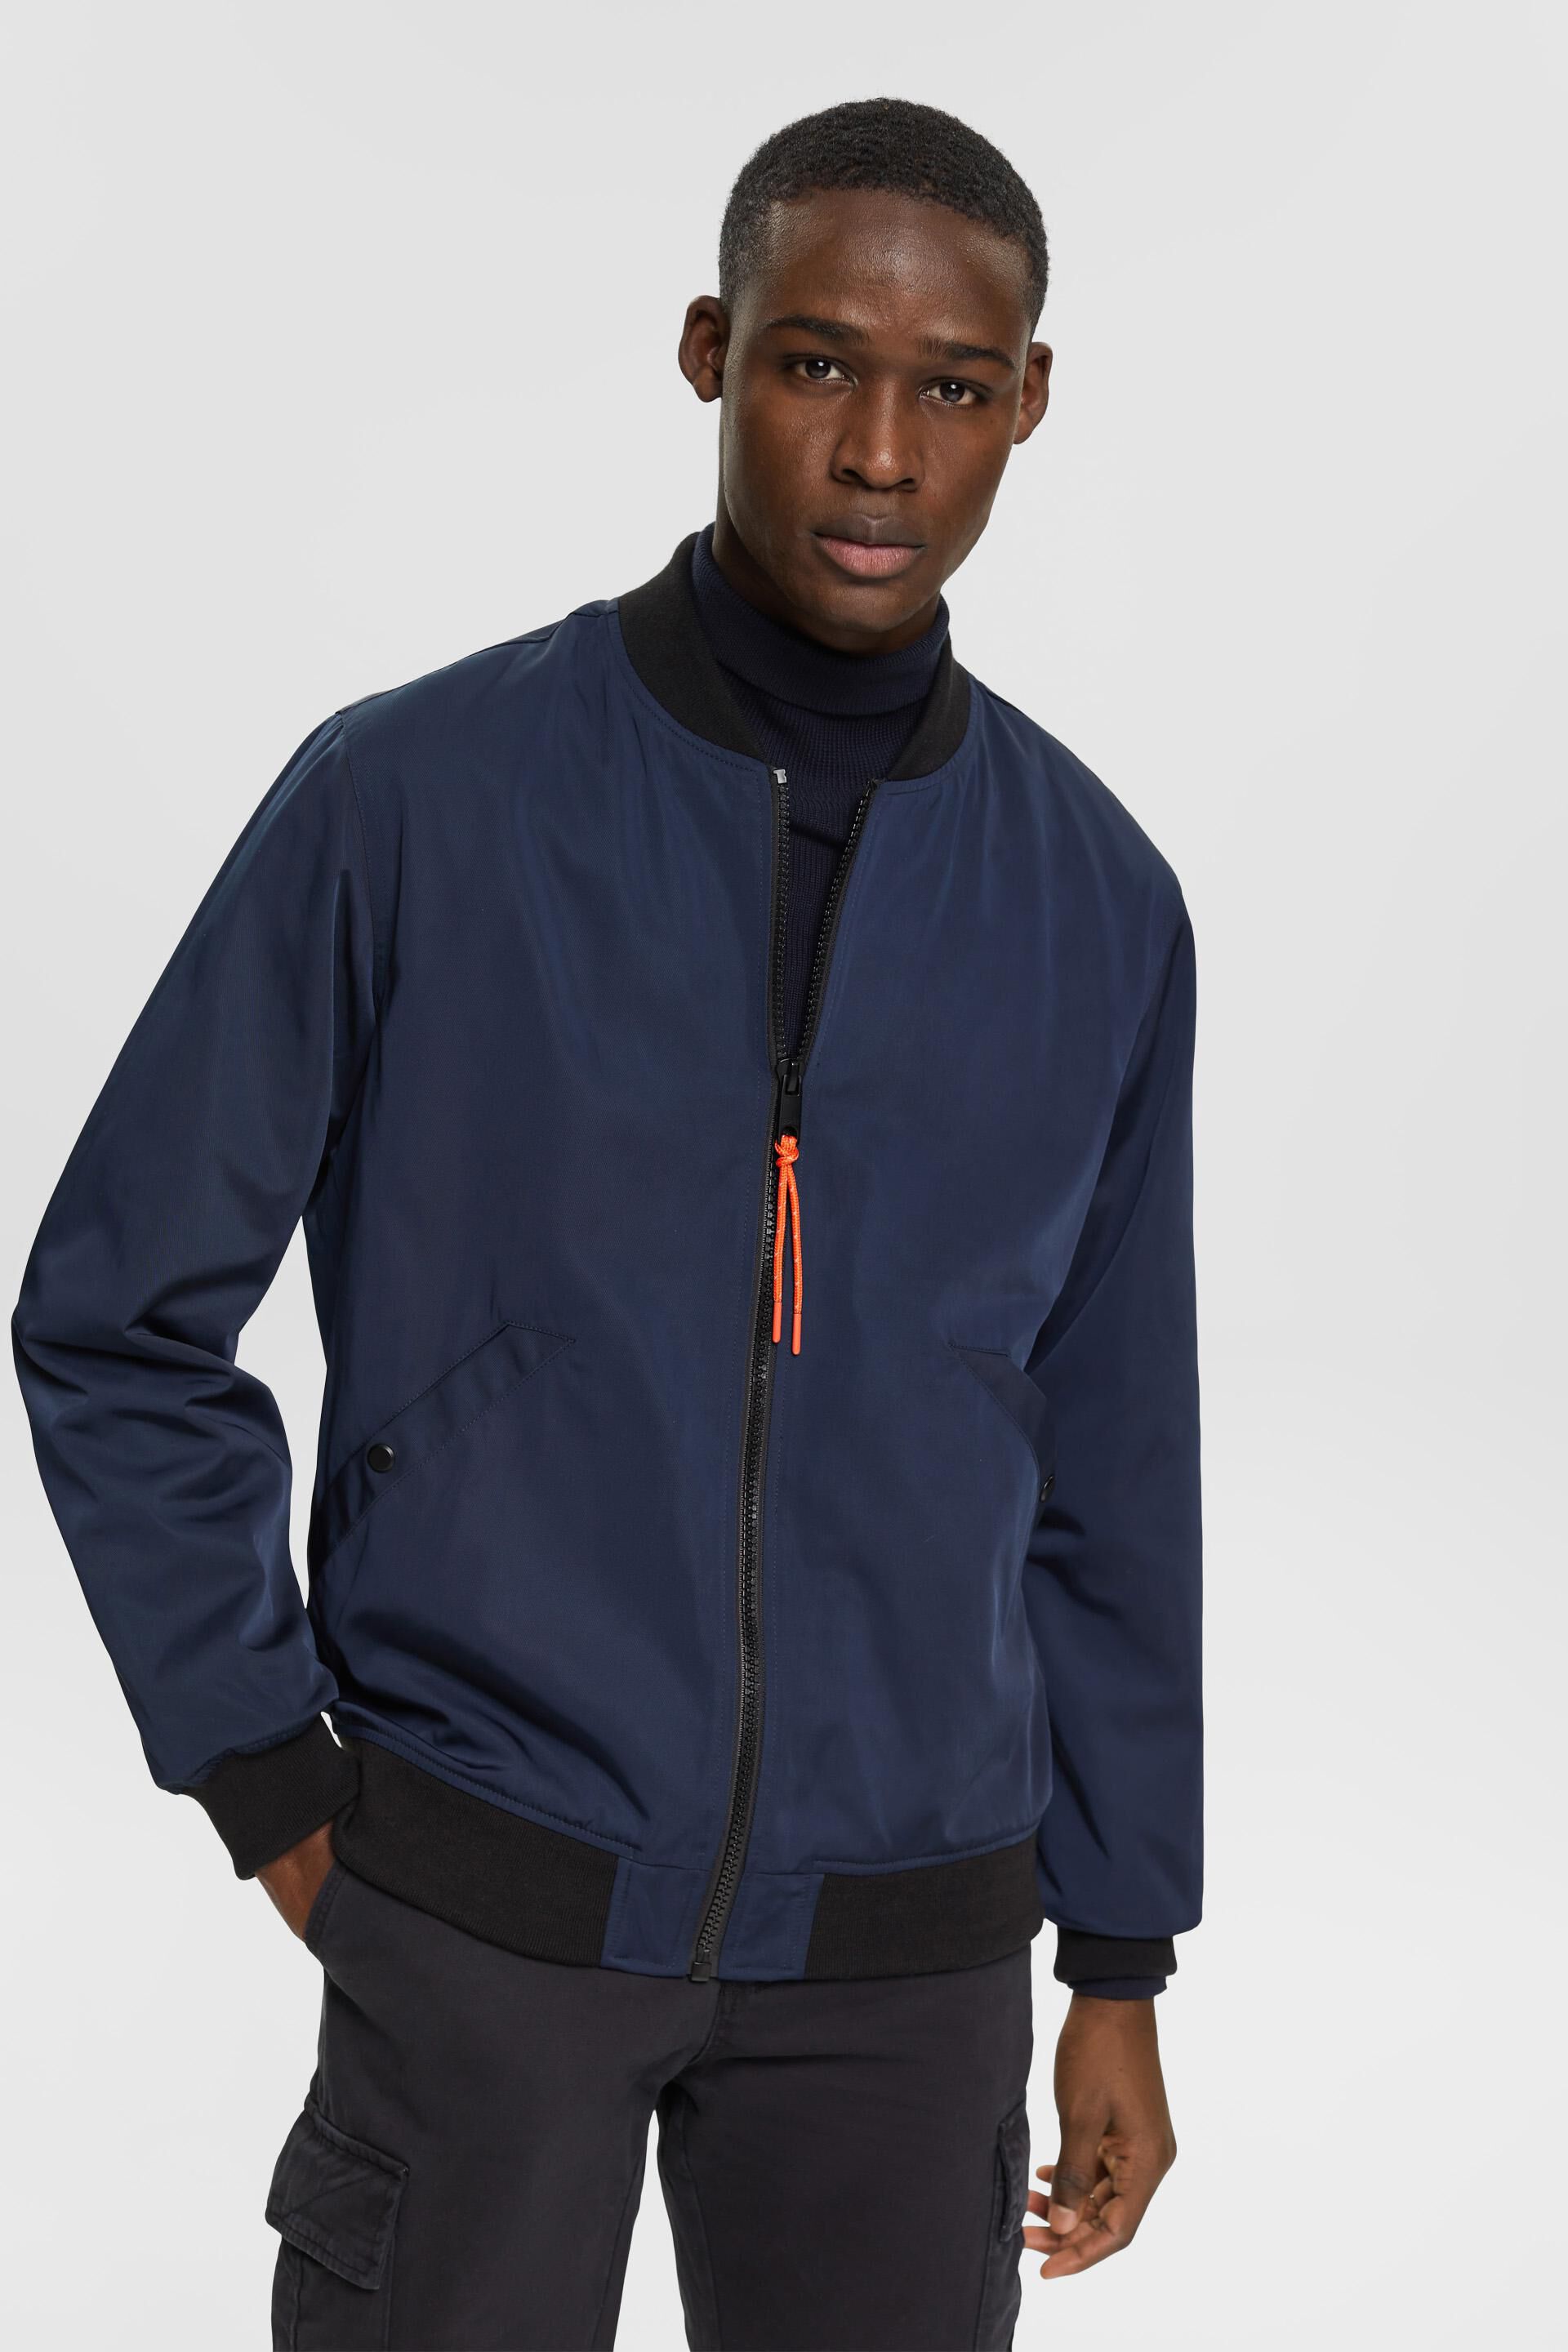 Capo SUEDE Bomber Jacket - Navy – CAPO | Meaning Behind The Brand